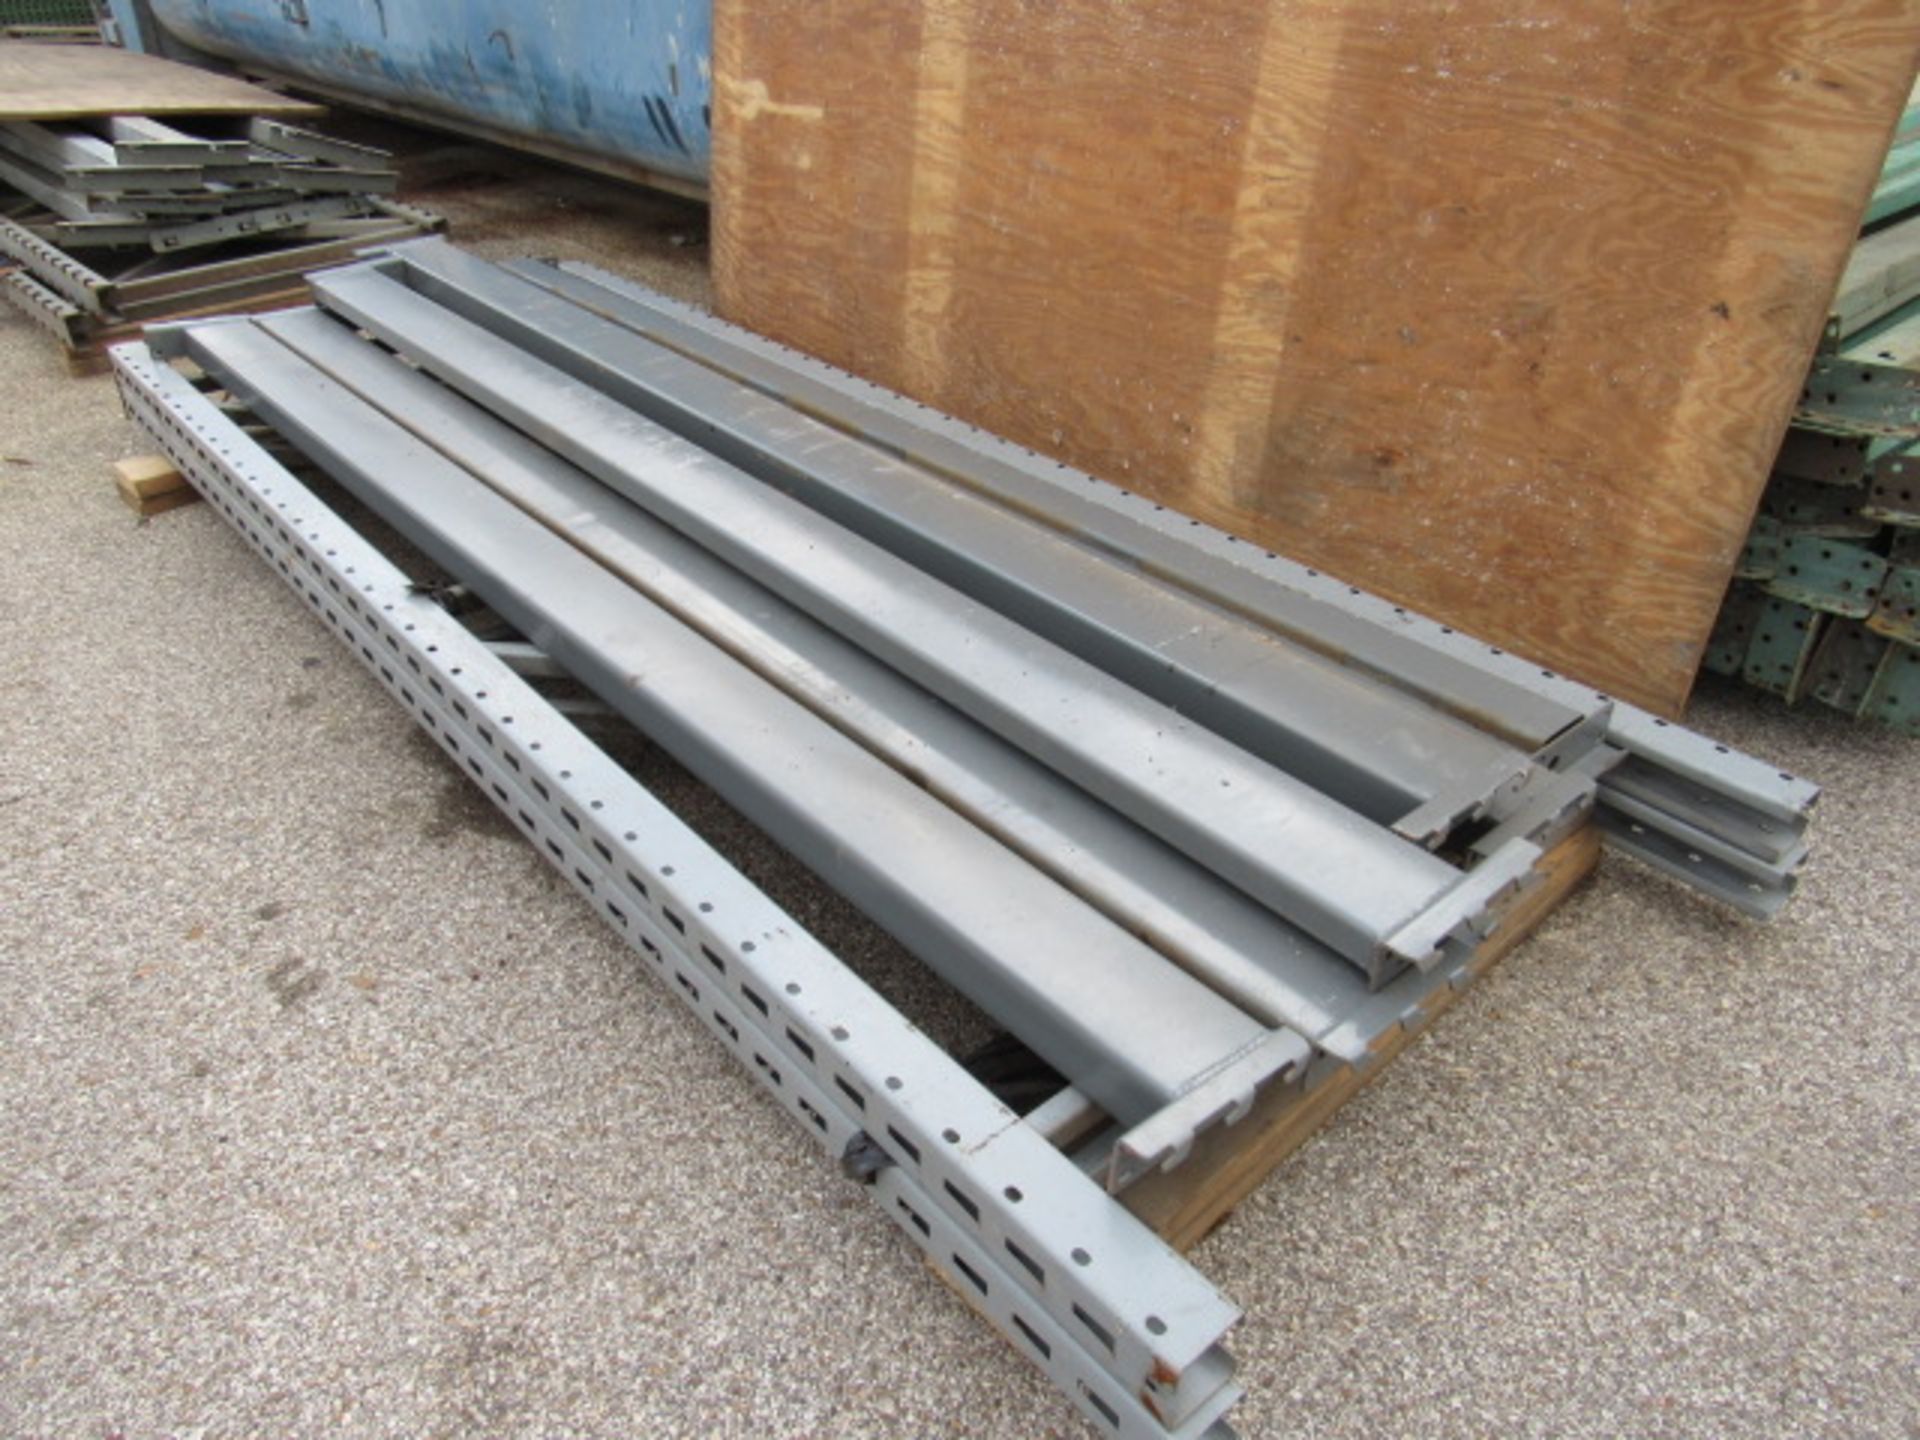 Lot of Pallet Racks with Uprights and Cross Beams - Image 11 of 14